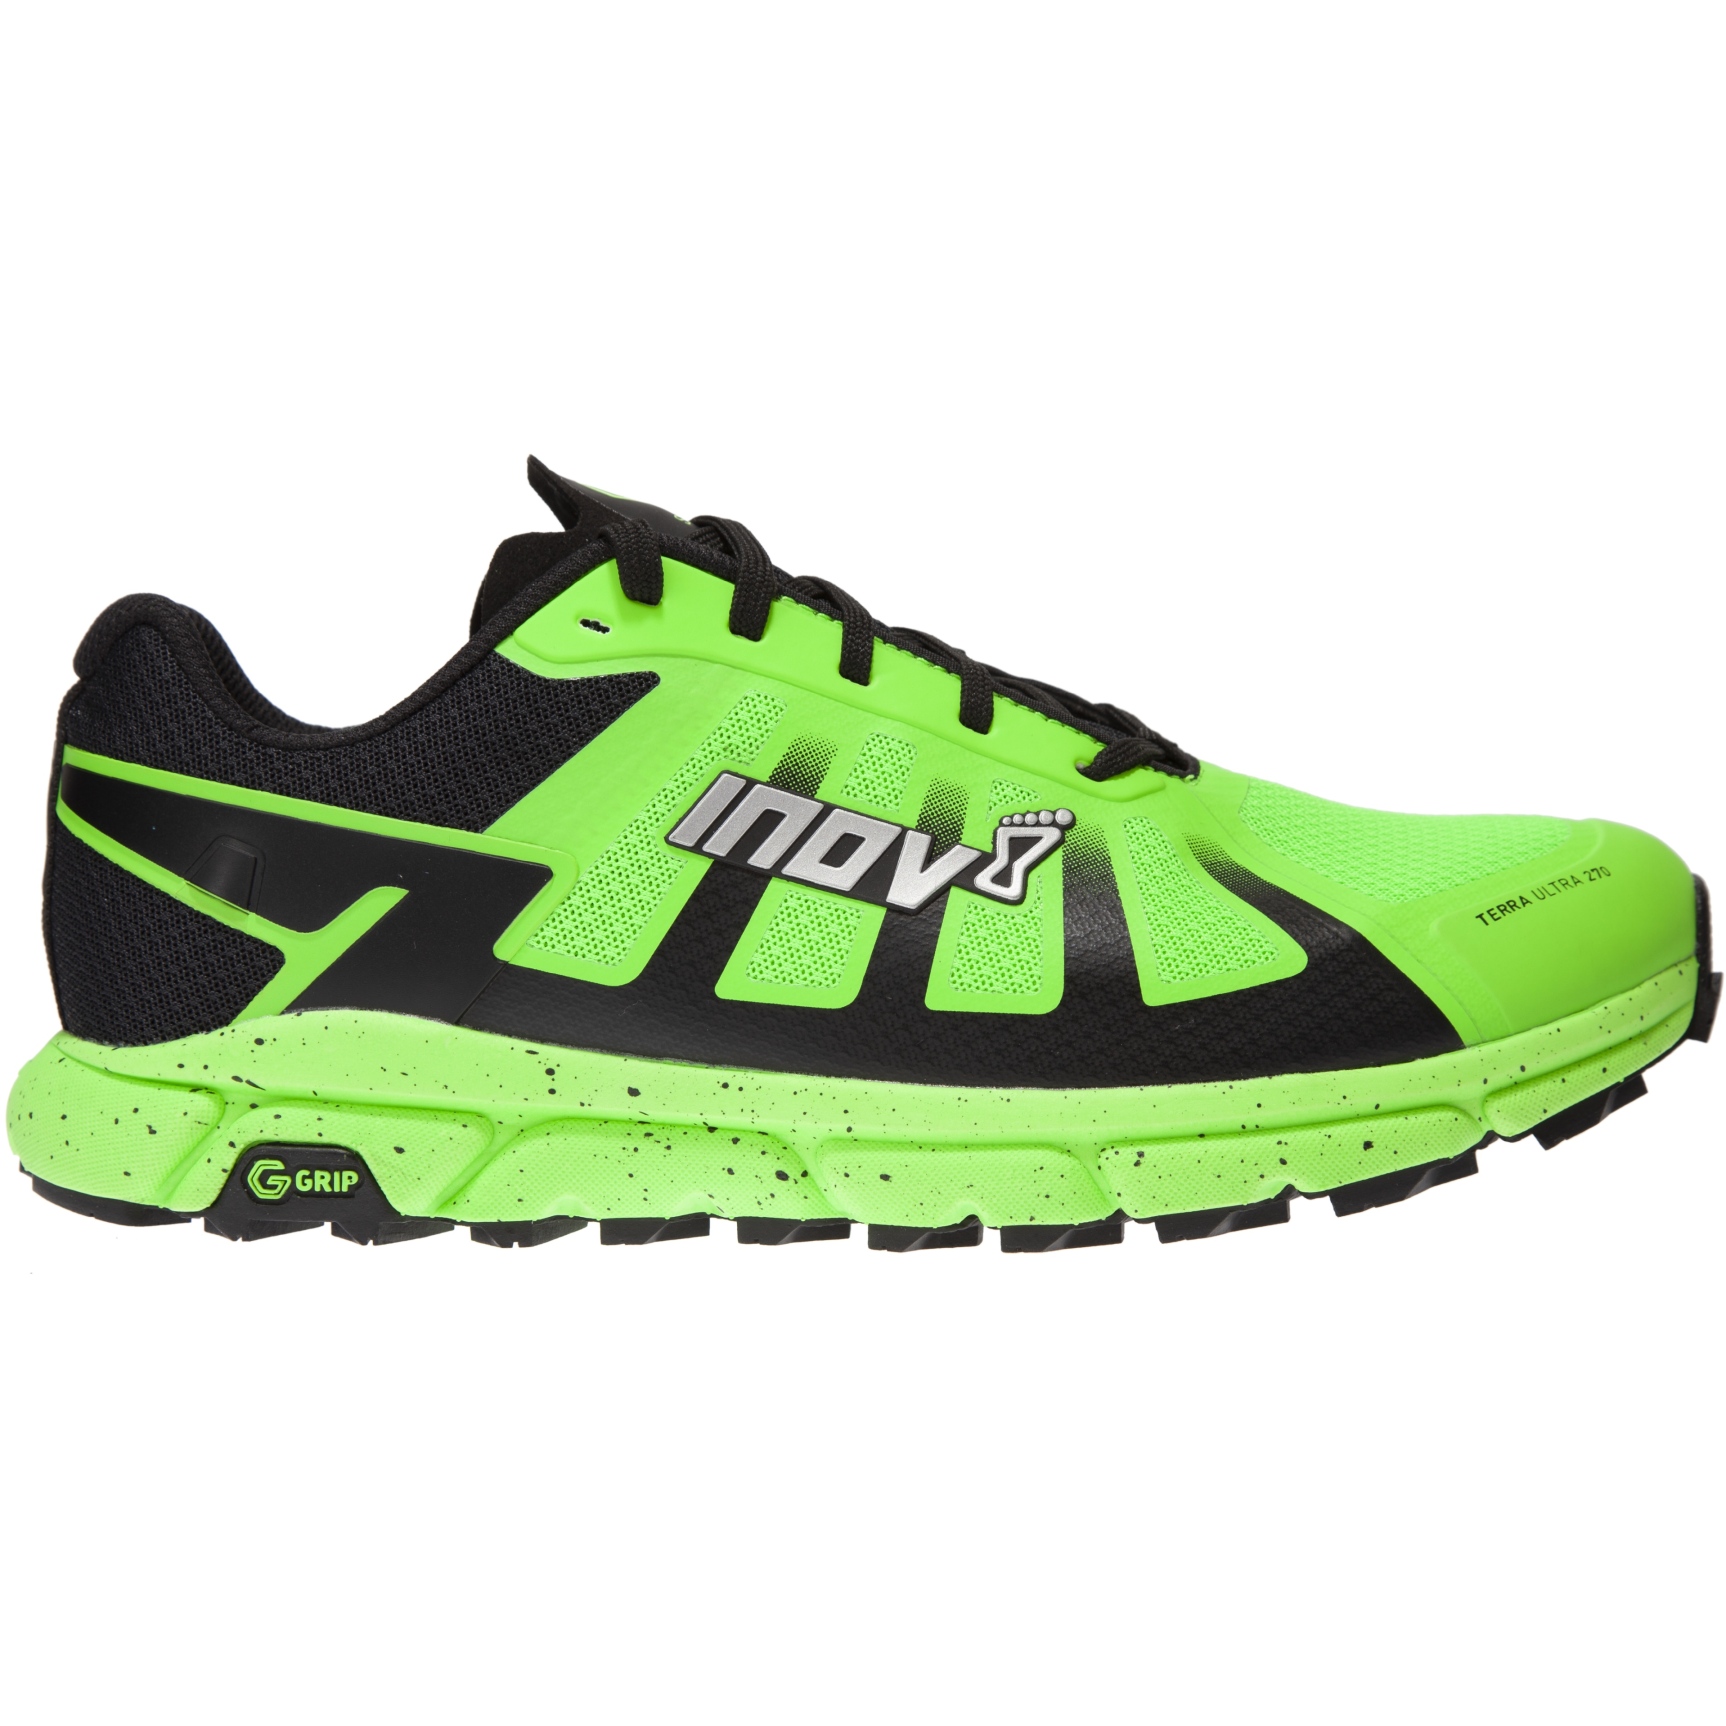 Image of Inov-8 TrailFly G 270 Wide Running Shoes - green/black